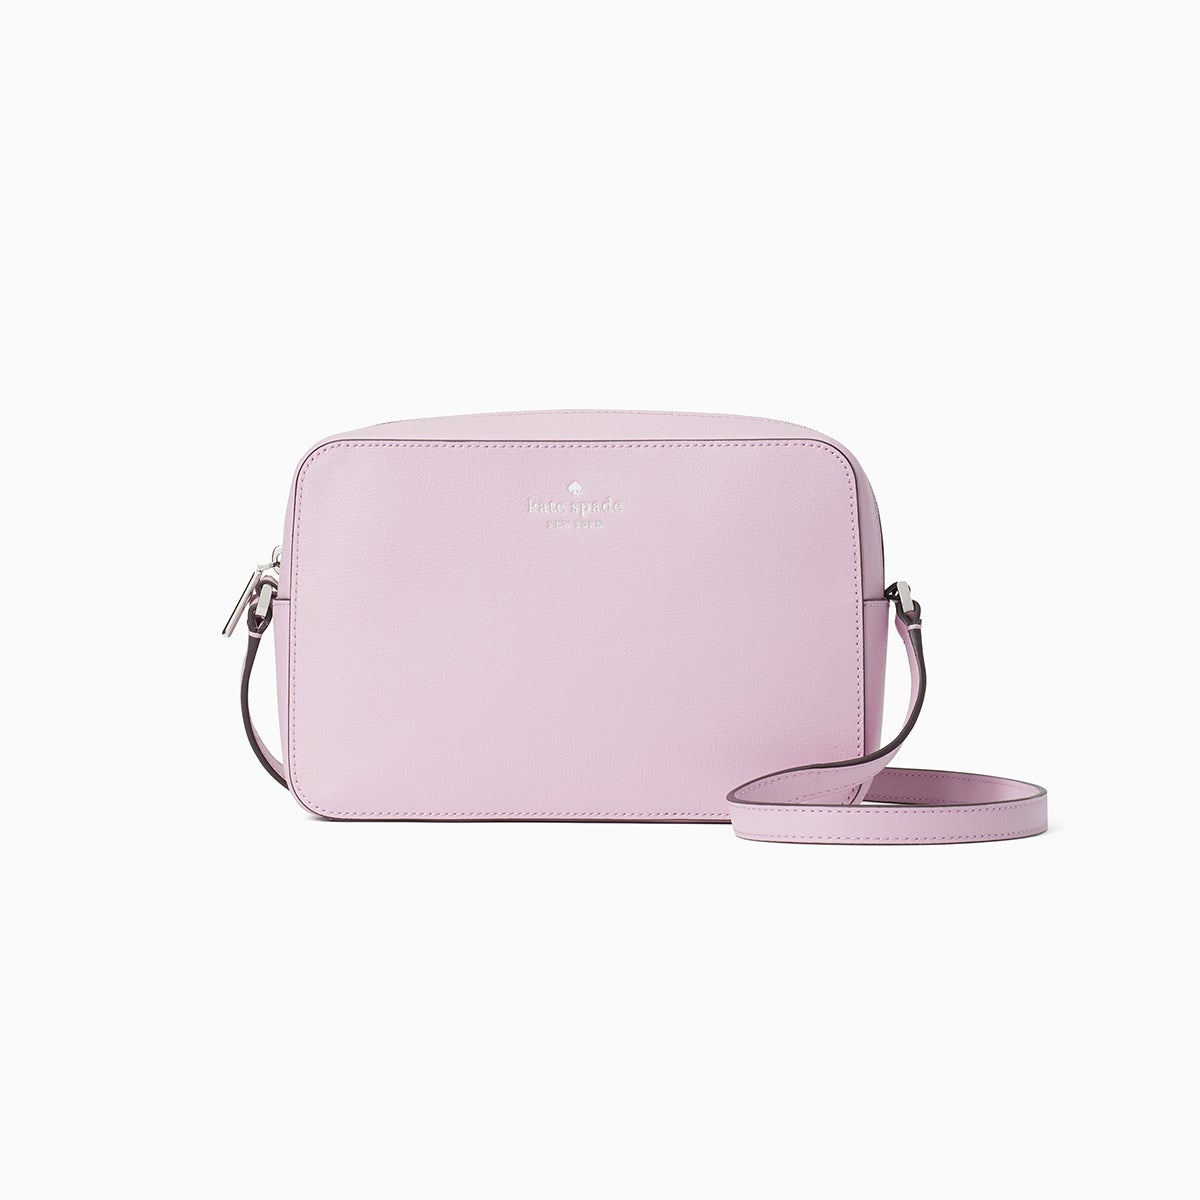 Kate Spade Surprise sale has up to 75 percent off crossbody bags